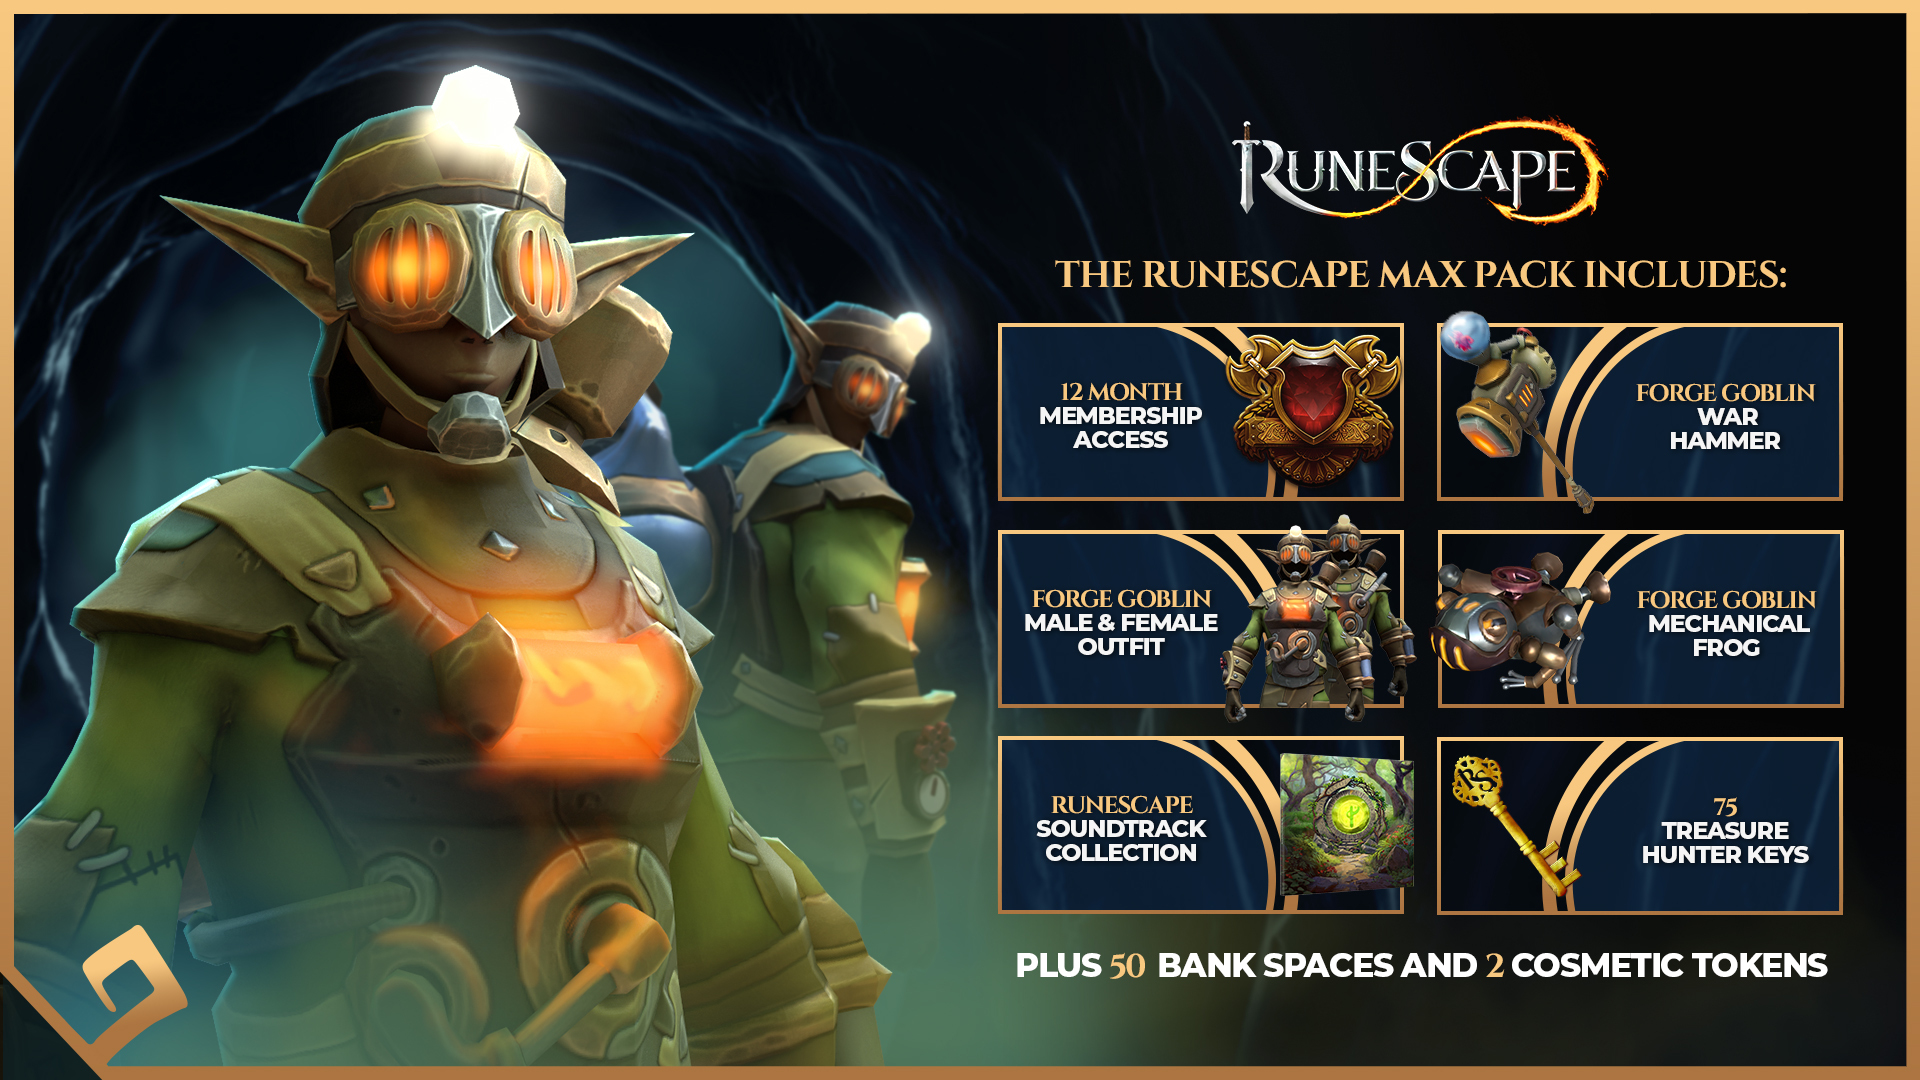 Højttaler fragment Picasso RuneScape on Twitter: "Playing on Steam can net you the following rewards:  ⭐️ Collect 20 New Achievements, 15 Trading Cards, and other Steam  customisations 💎 Grab a membership pack on Steam to